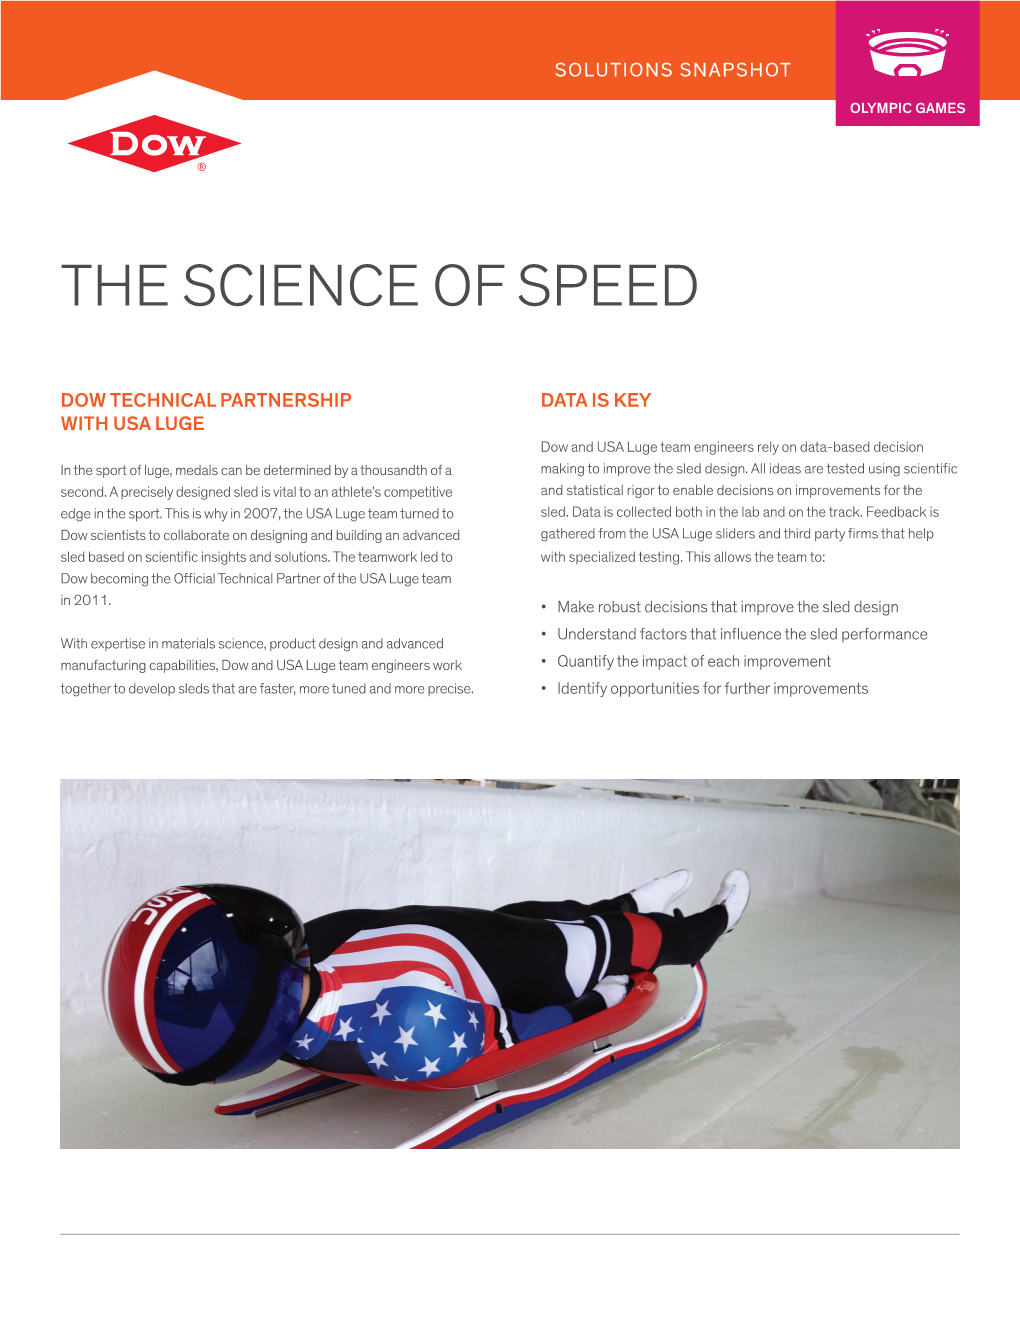 The Science of Speed